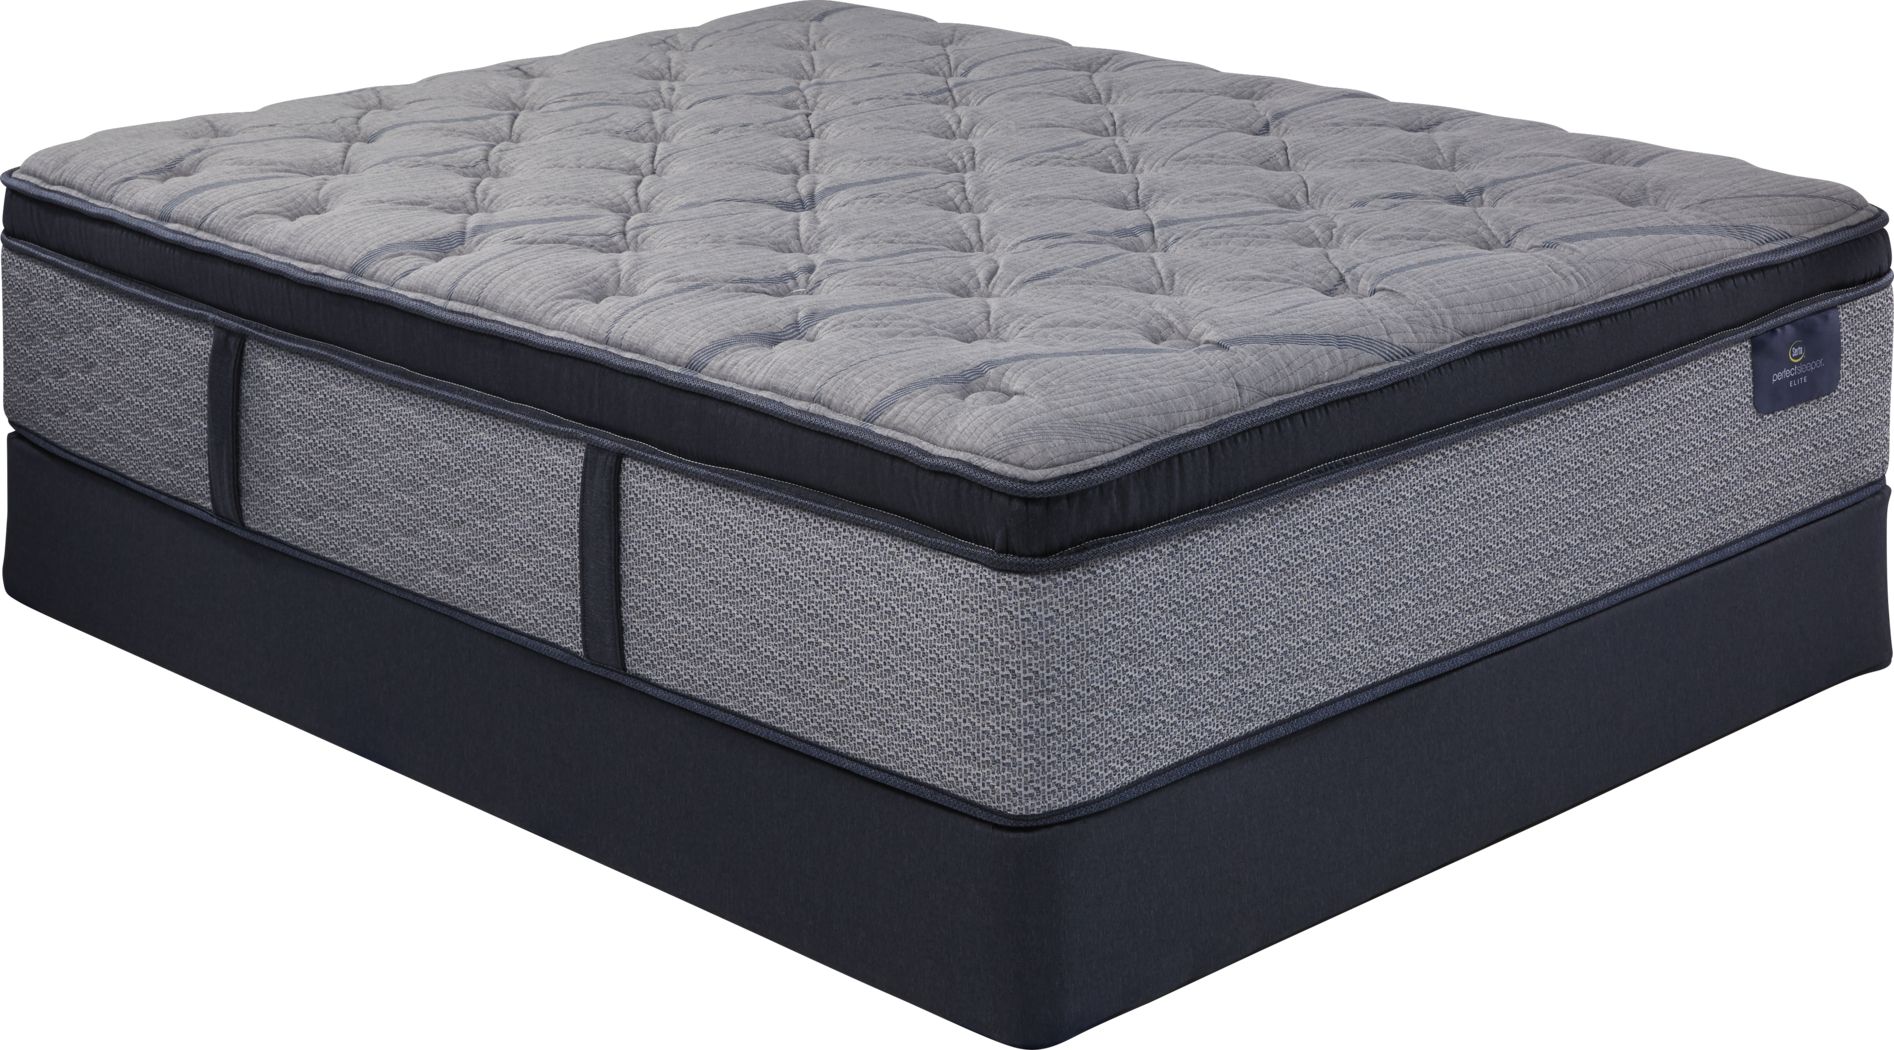 Queen Size Mattress Sets for Sale